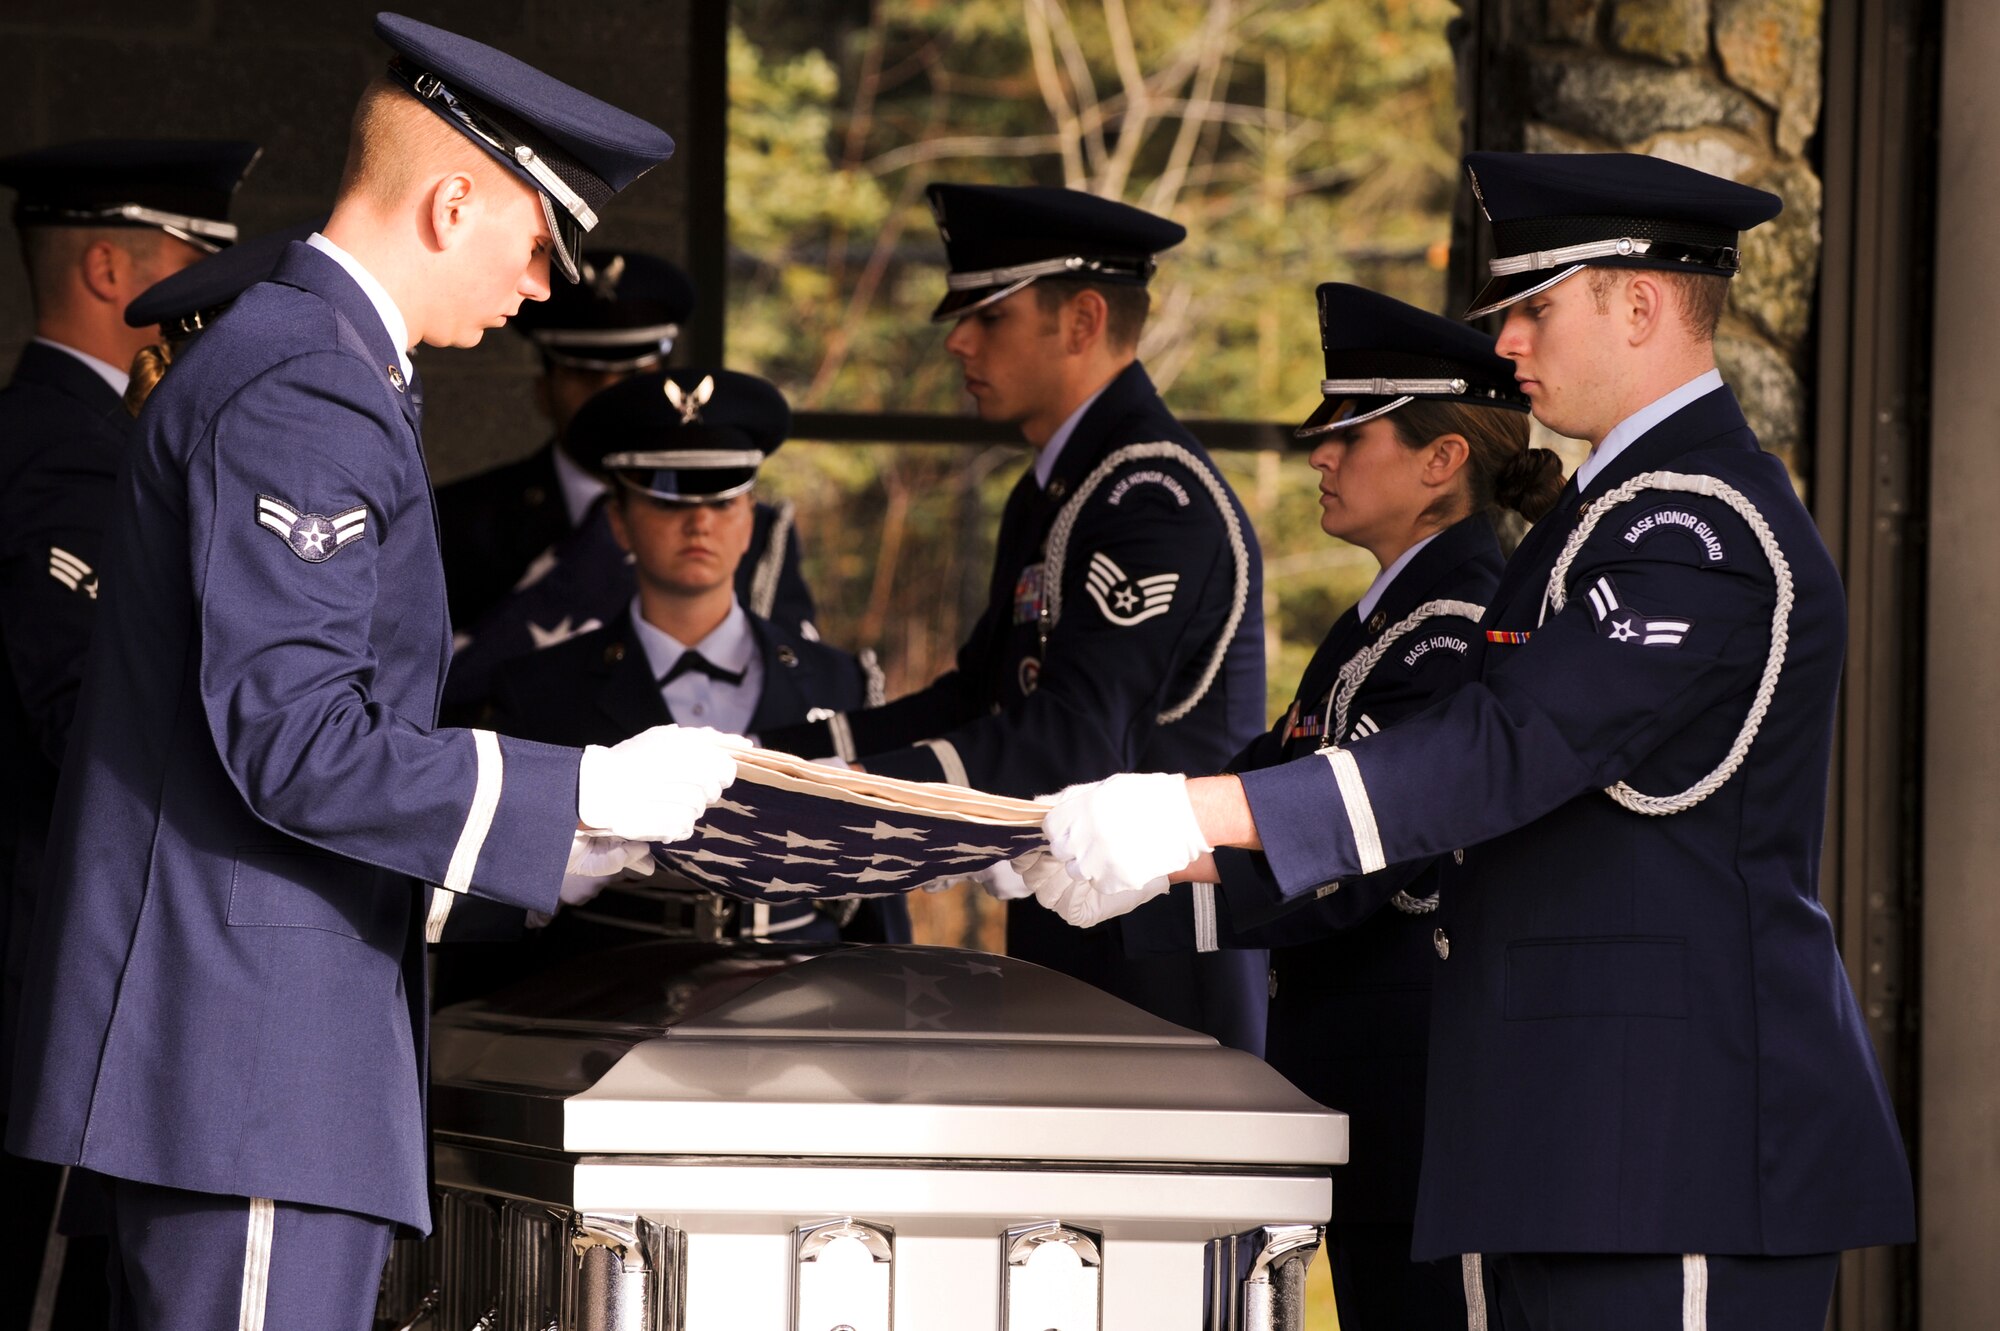 FORT RICHARDSON, Alaska -- Members of the Elmendorf Air Force Base Honor Guard fold a flag during the funeral service for Staff Sgt. Shawn Rankin, here at the Fort Richardson Cemetery Oct. 15. Rankin of Anchorage, Alaska, was assigned to the 56th Aircraft Maintenance Squadron and served as an F-16 Fighting Falcon crew chief at Luke Air Force Base, Ariz. (U.S. Air Force photo/Staff Sgt. Joshua Garcia)